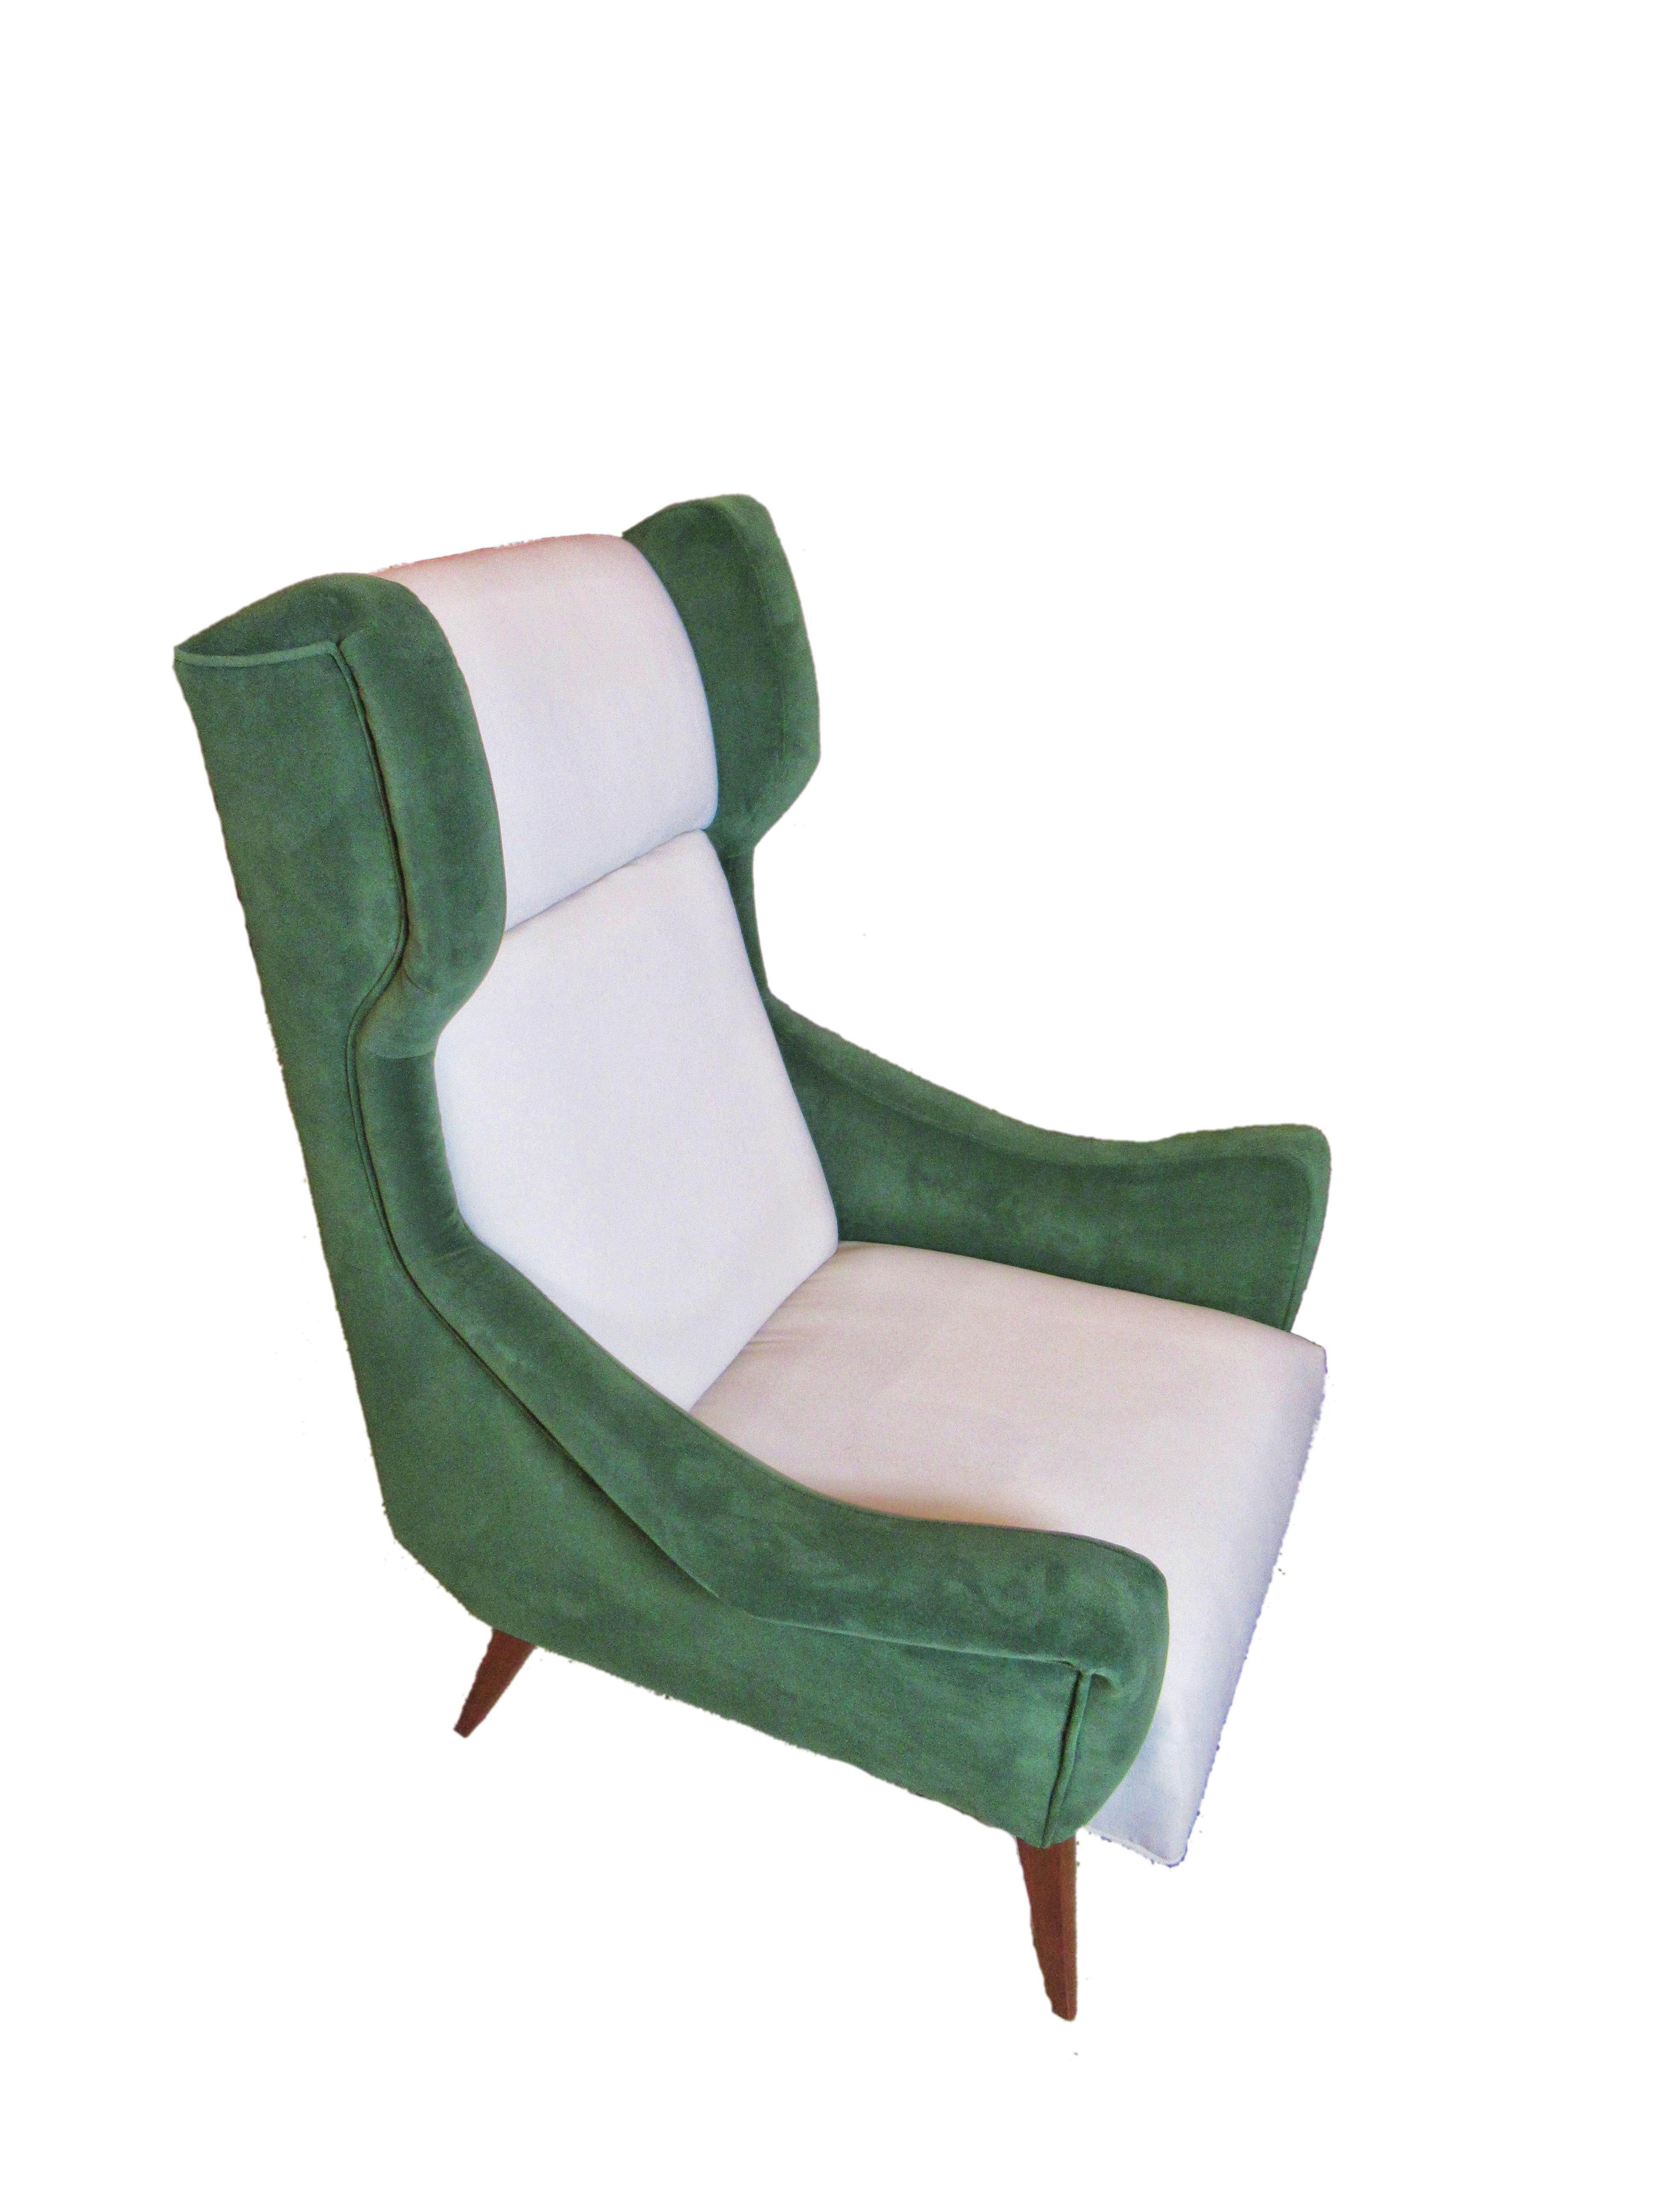 Italian Modern Upholstered Wing Chair, Gio Ponti, 1950's In Excellent Condition For Sale In Hollywood, FL